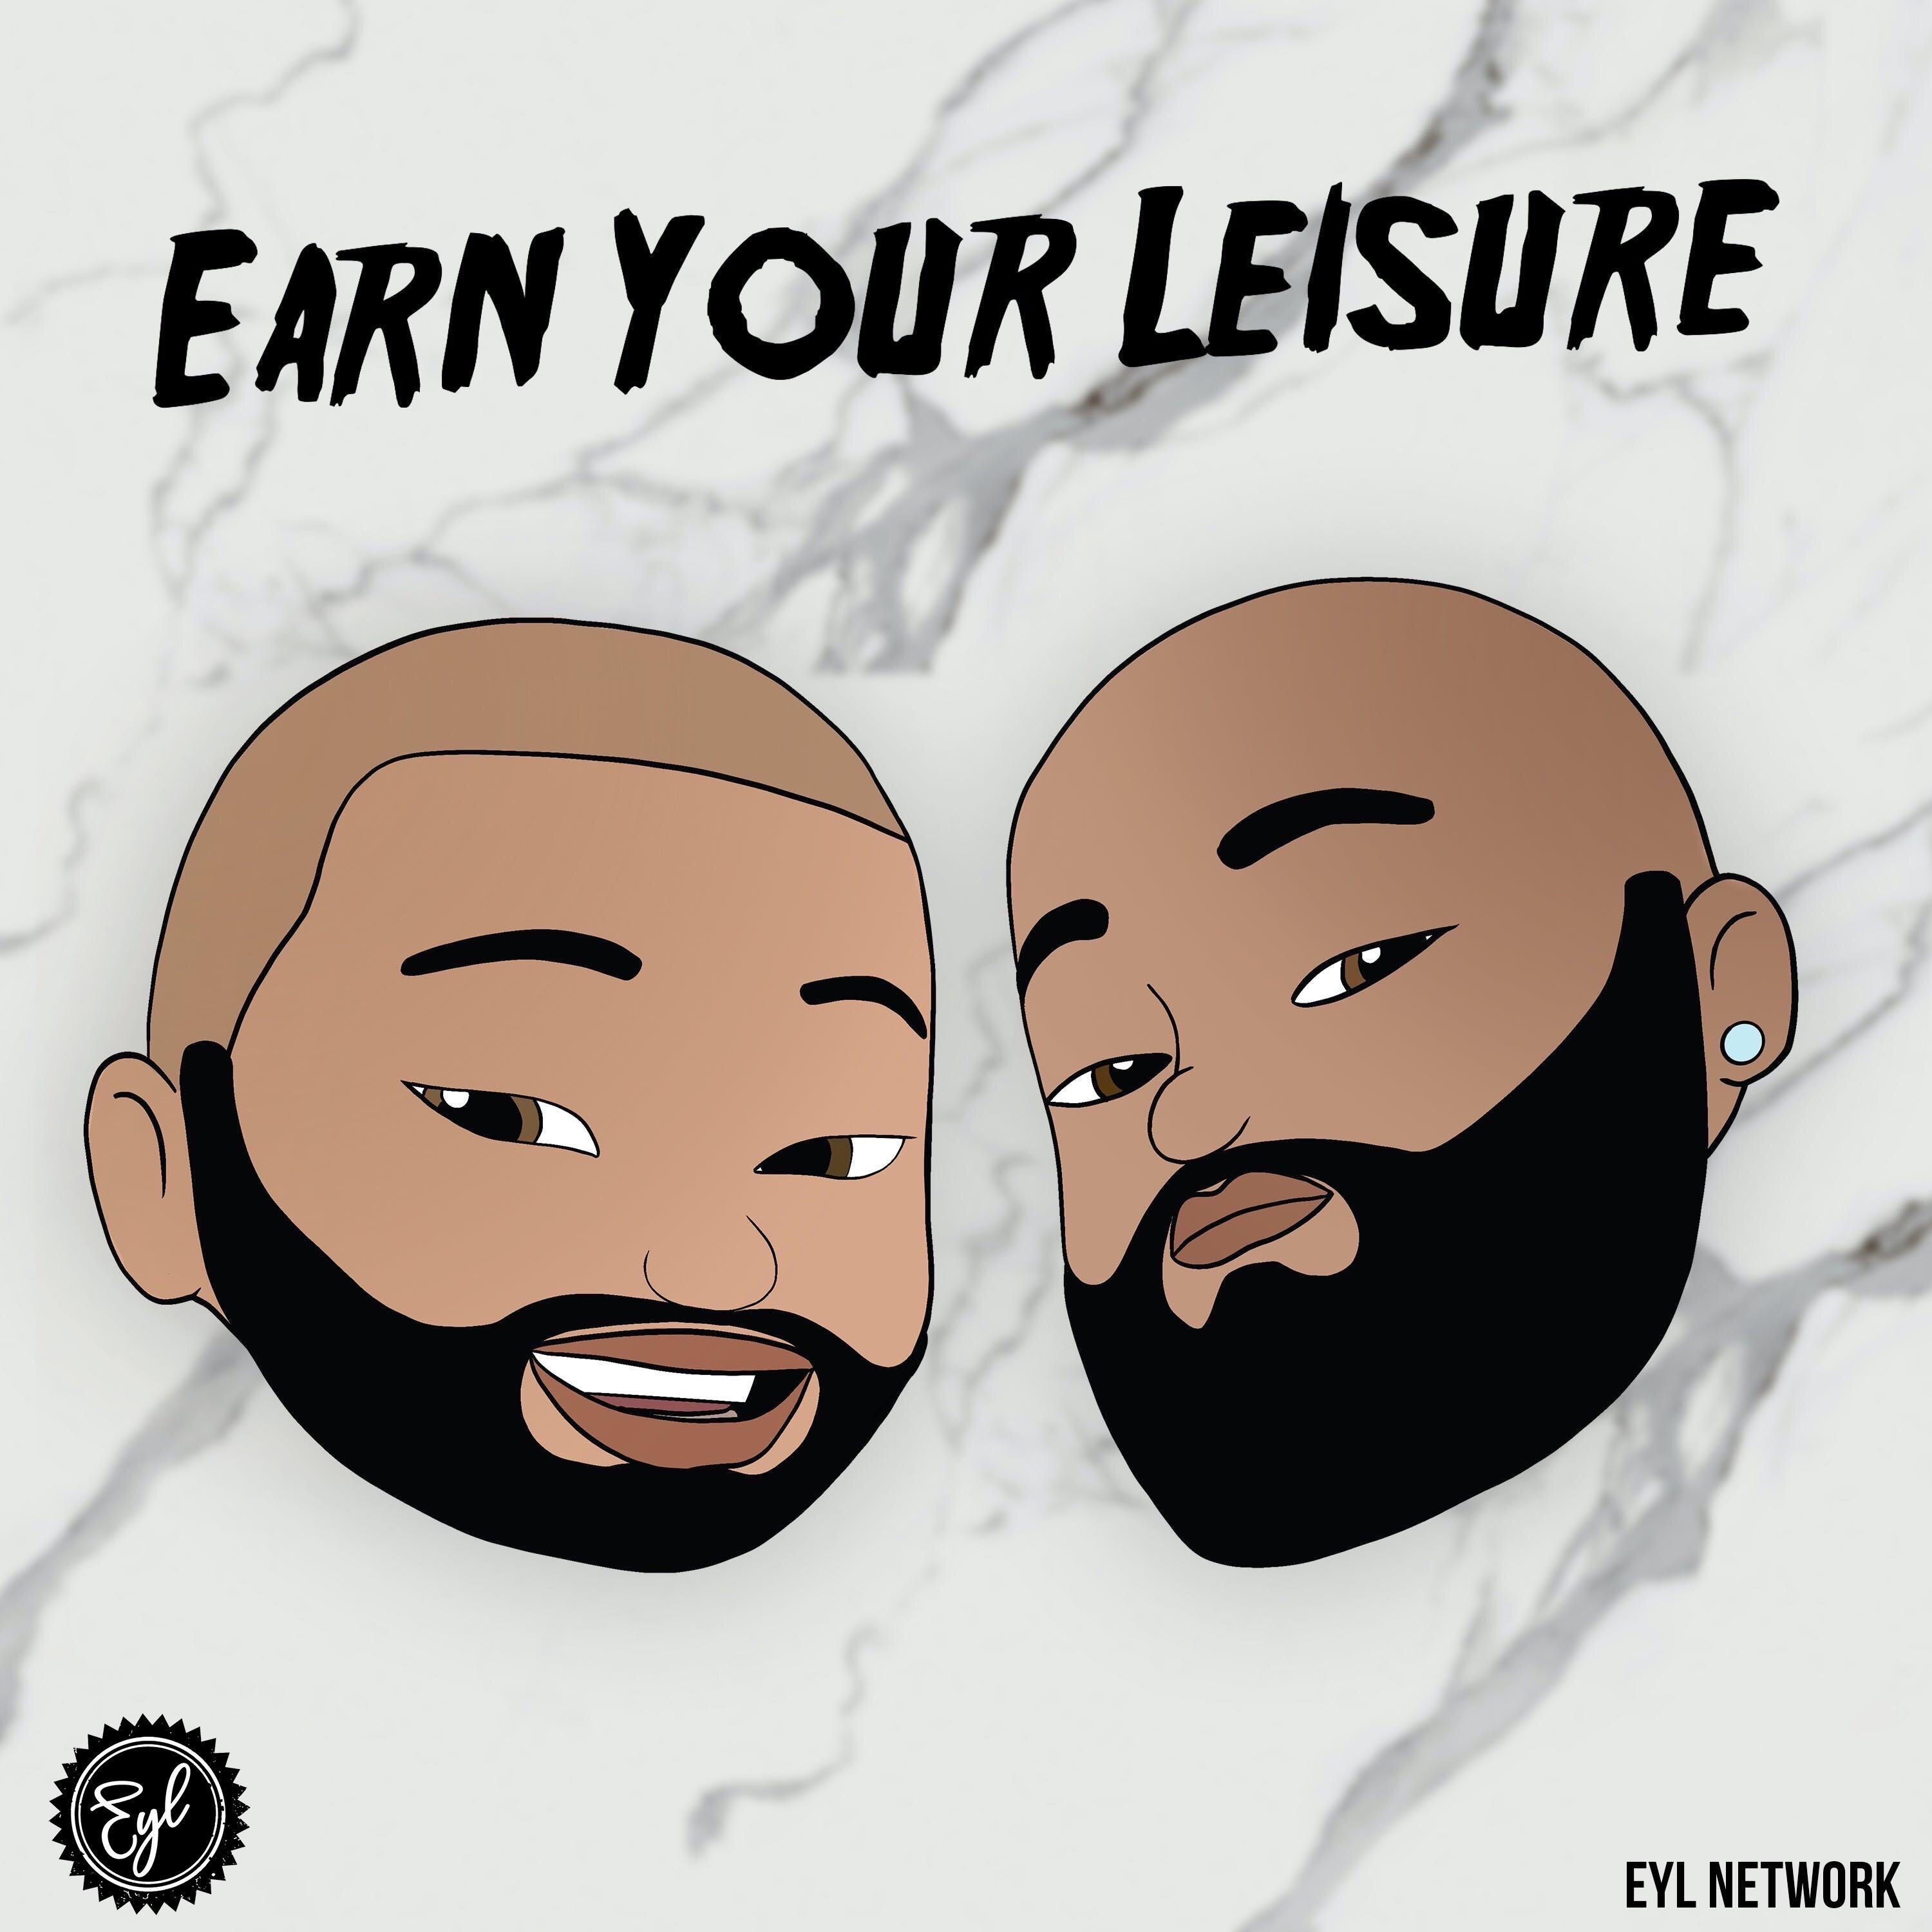 Earn Your Leisure - If you buy the product why not buy shares